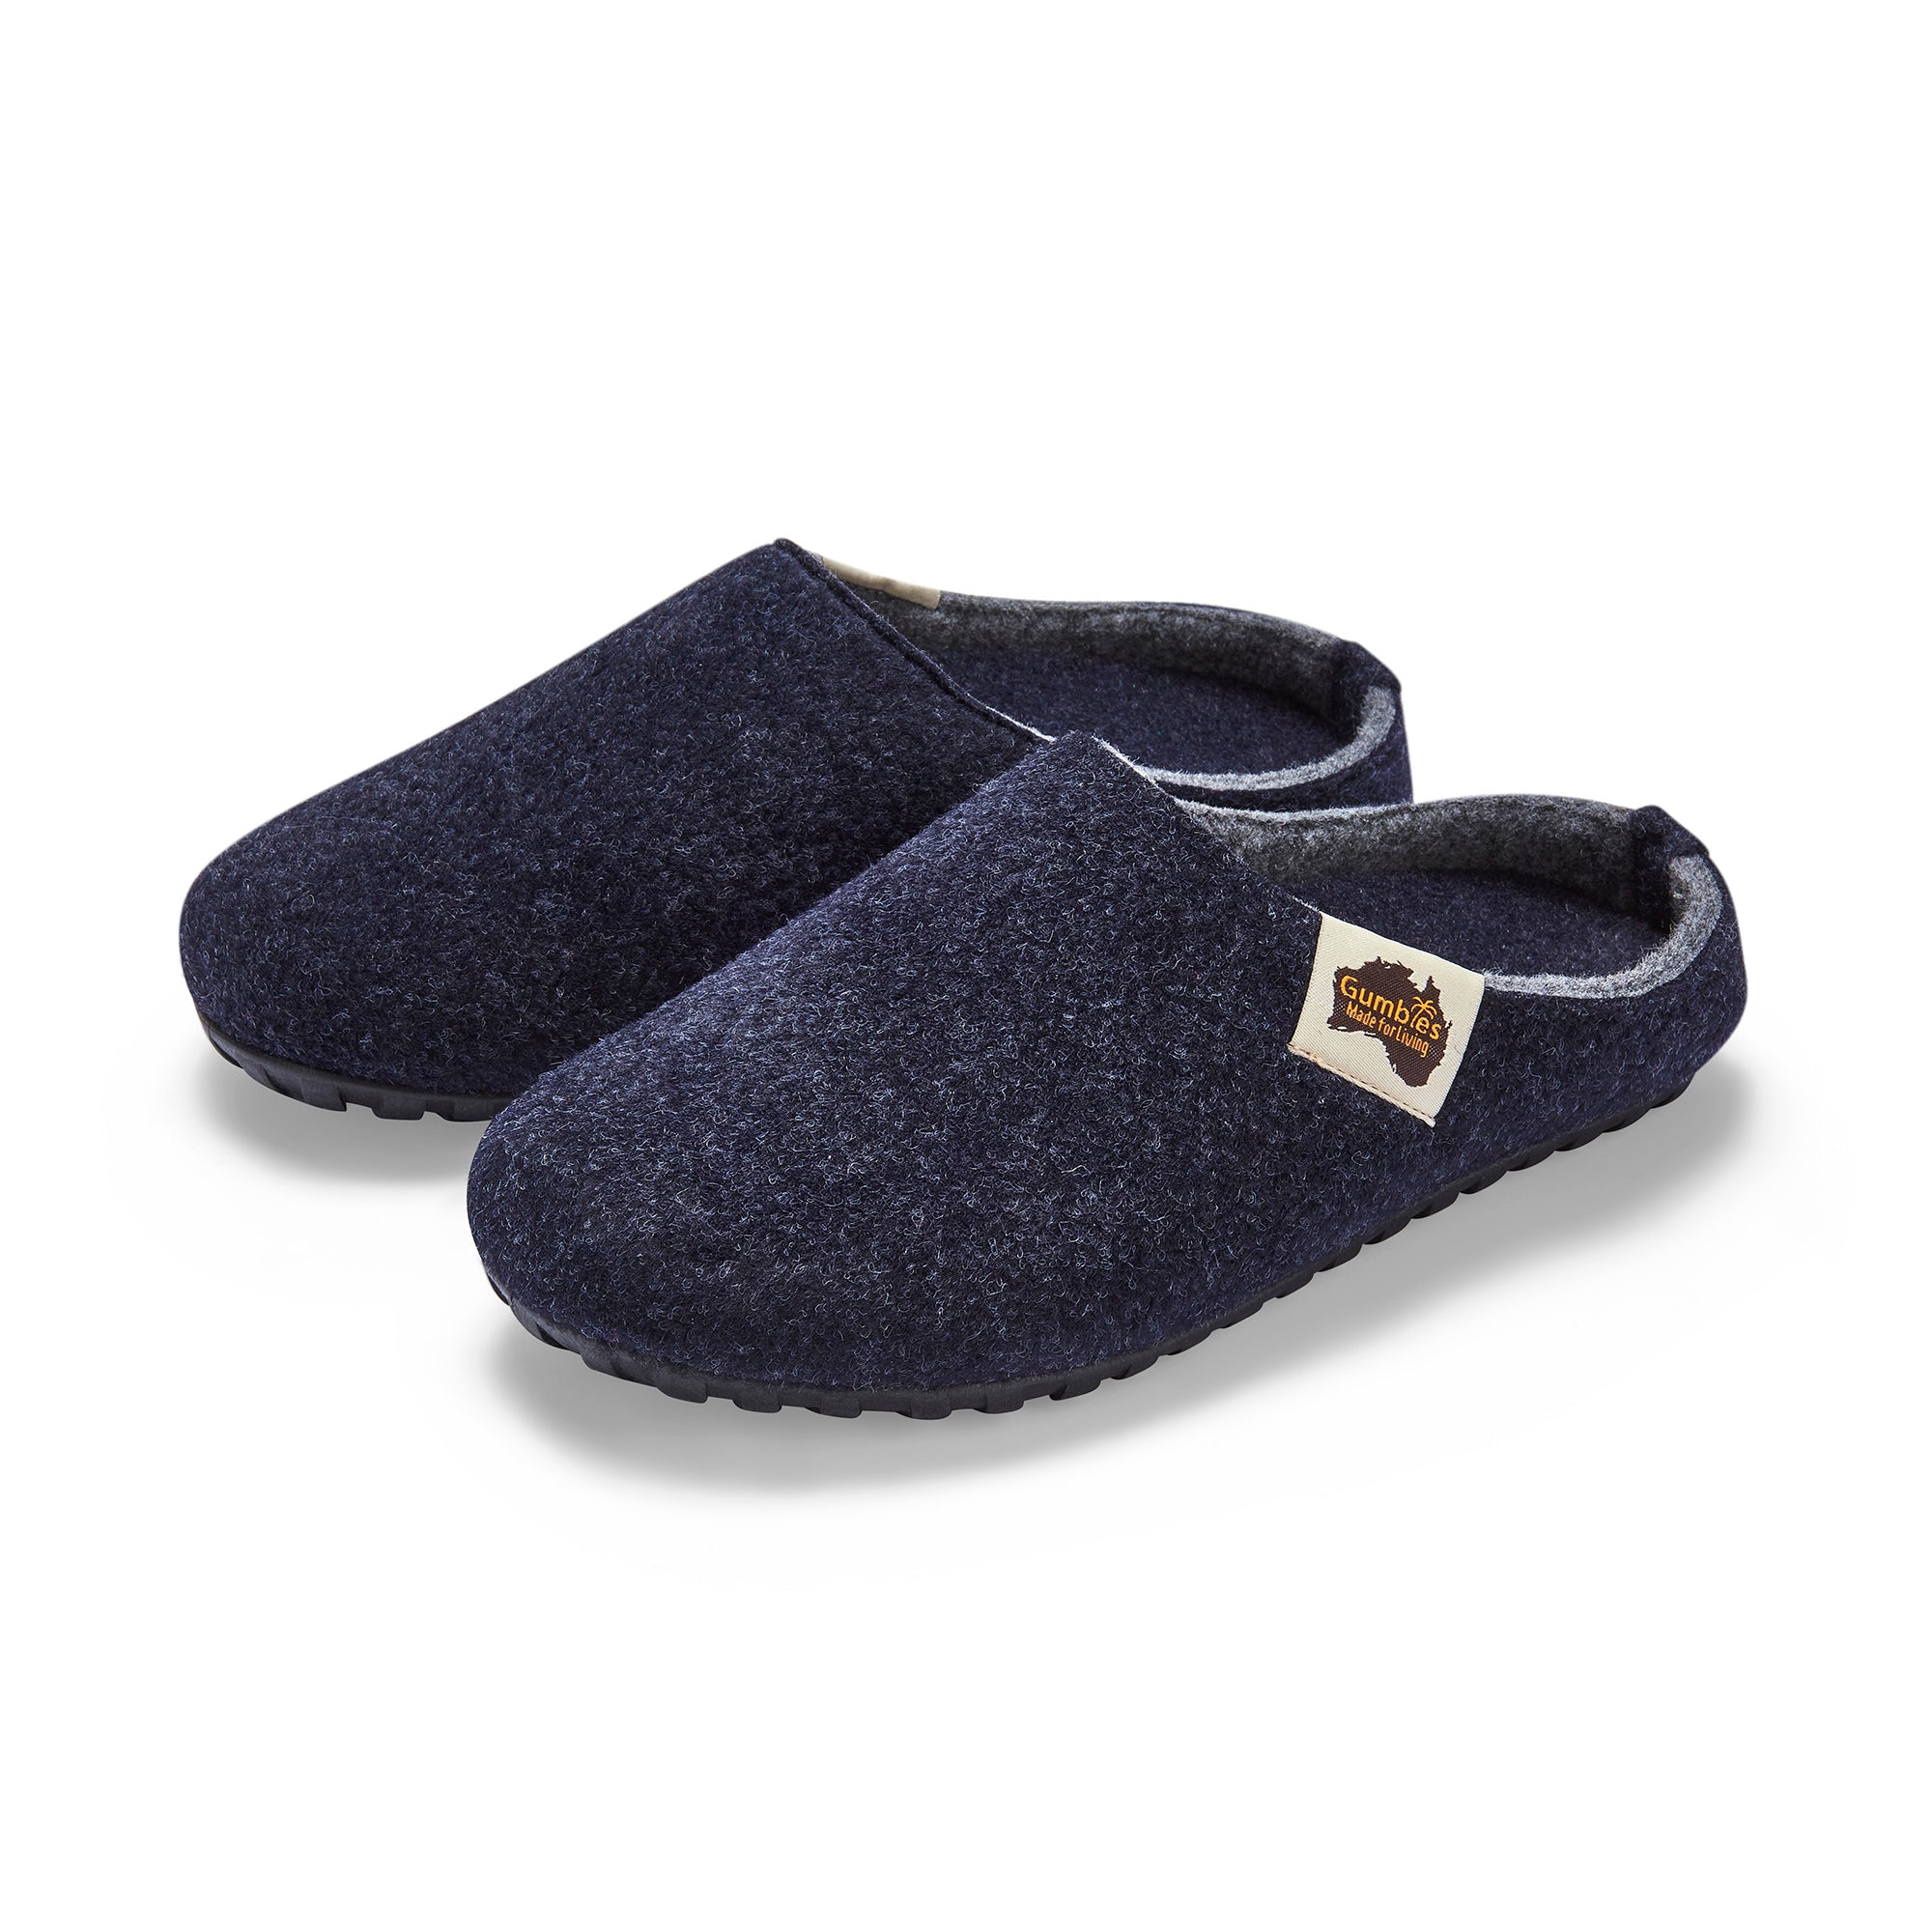 Outback Slippers - Men's - Navy & Grey